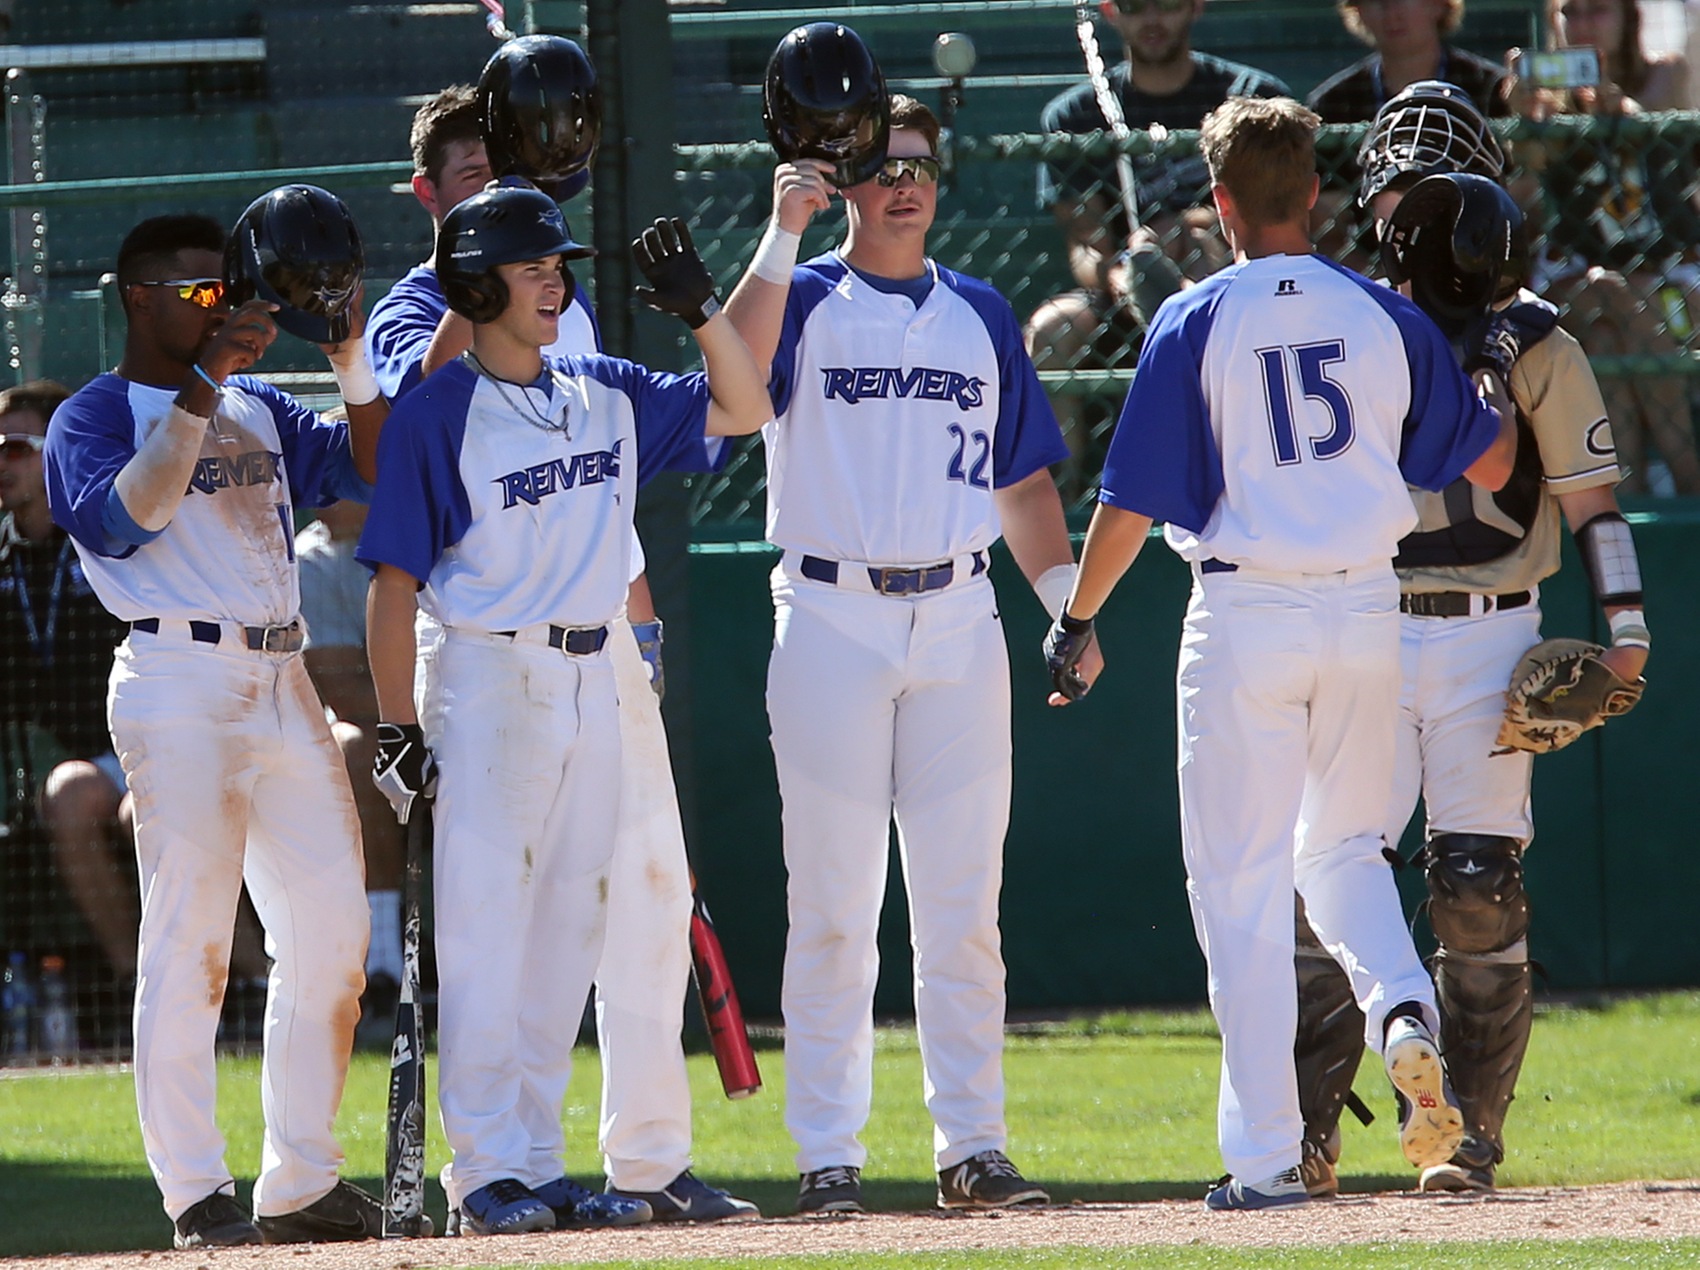 Reivers battle, drop extra inning thriller to defending National Champion Chipola to end season